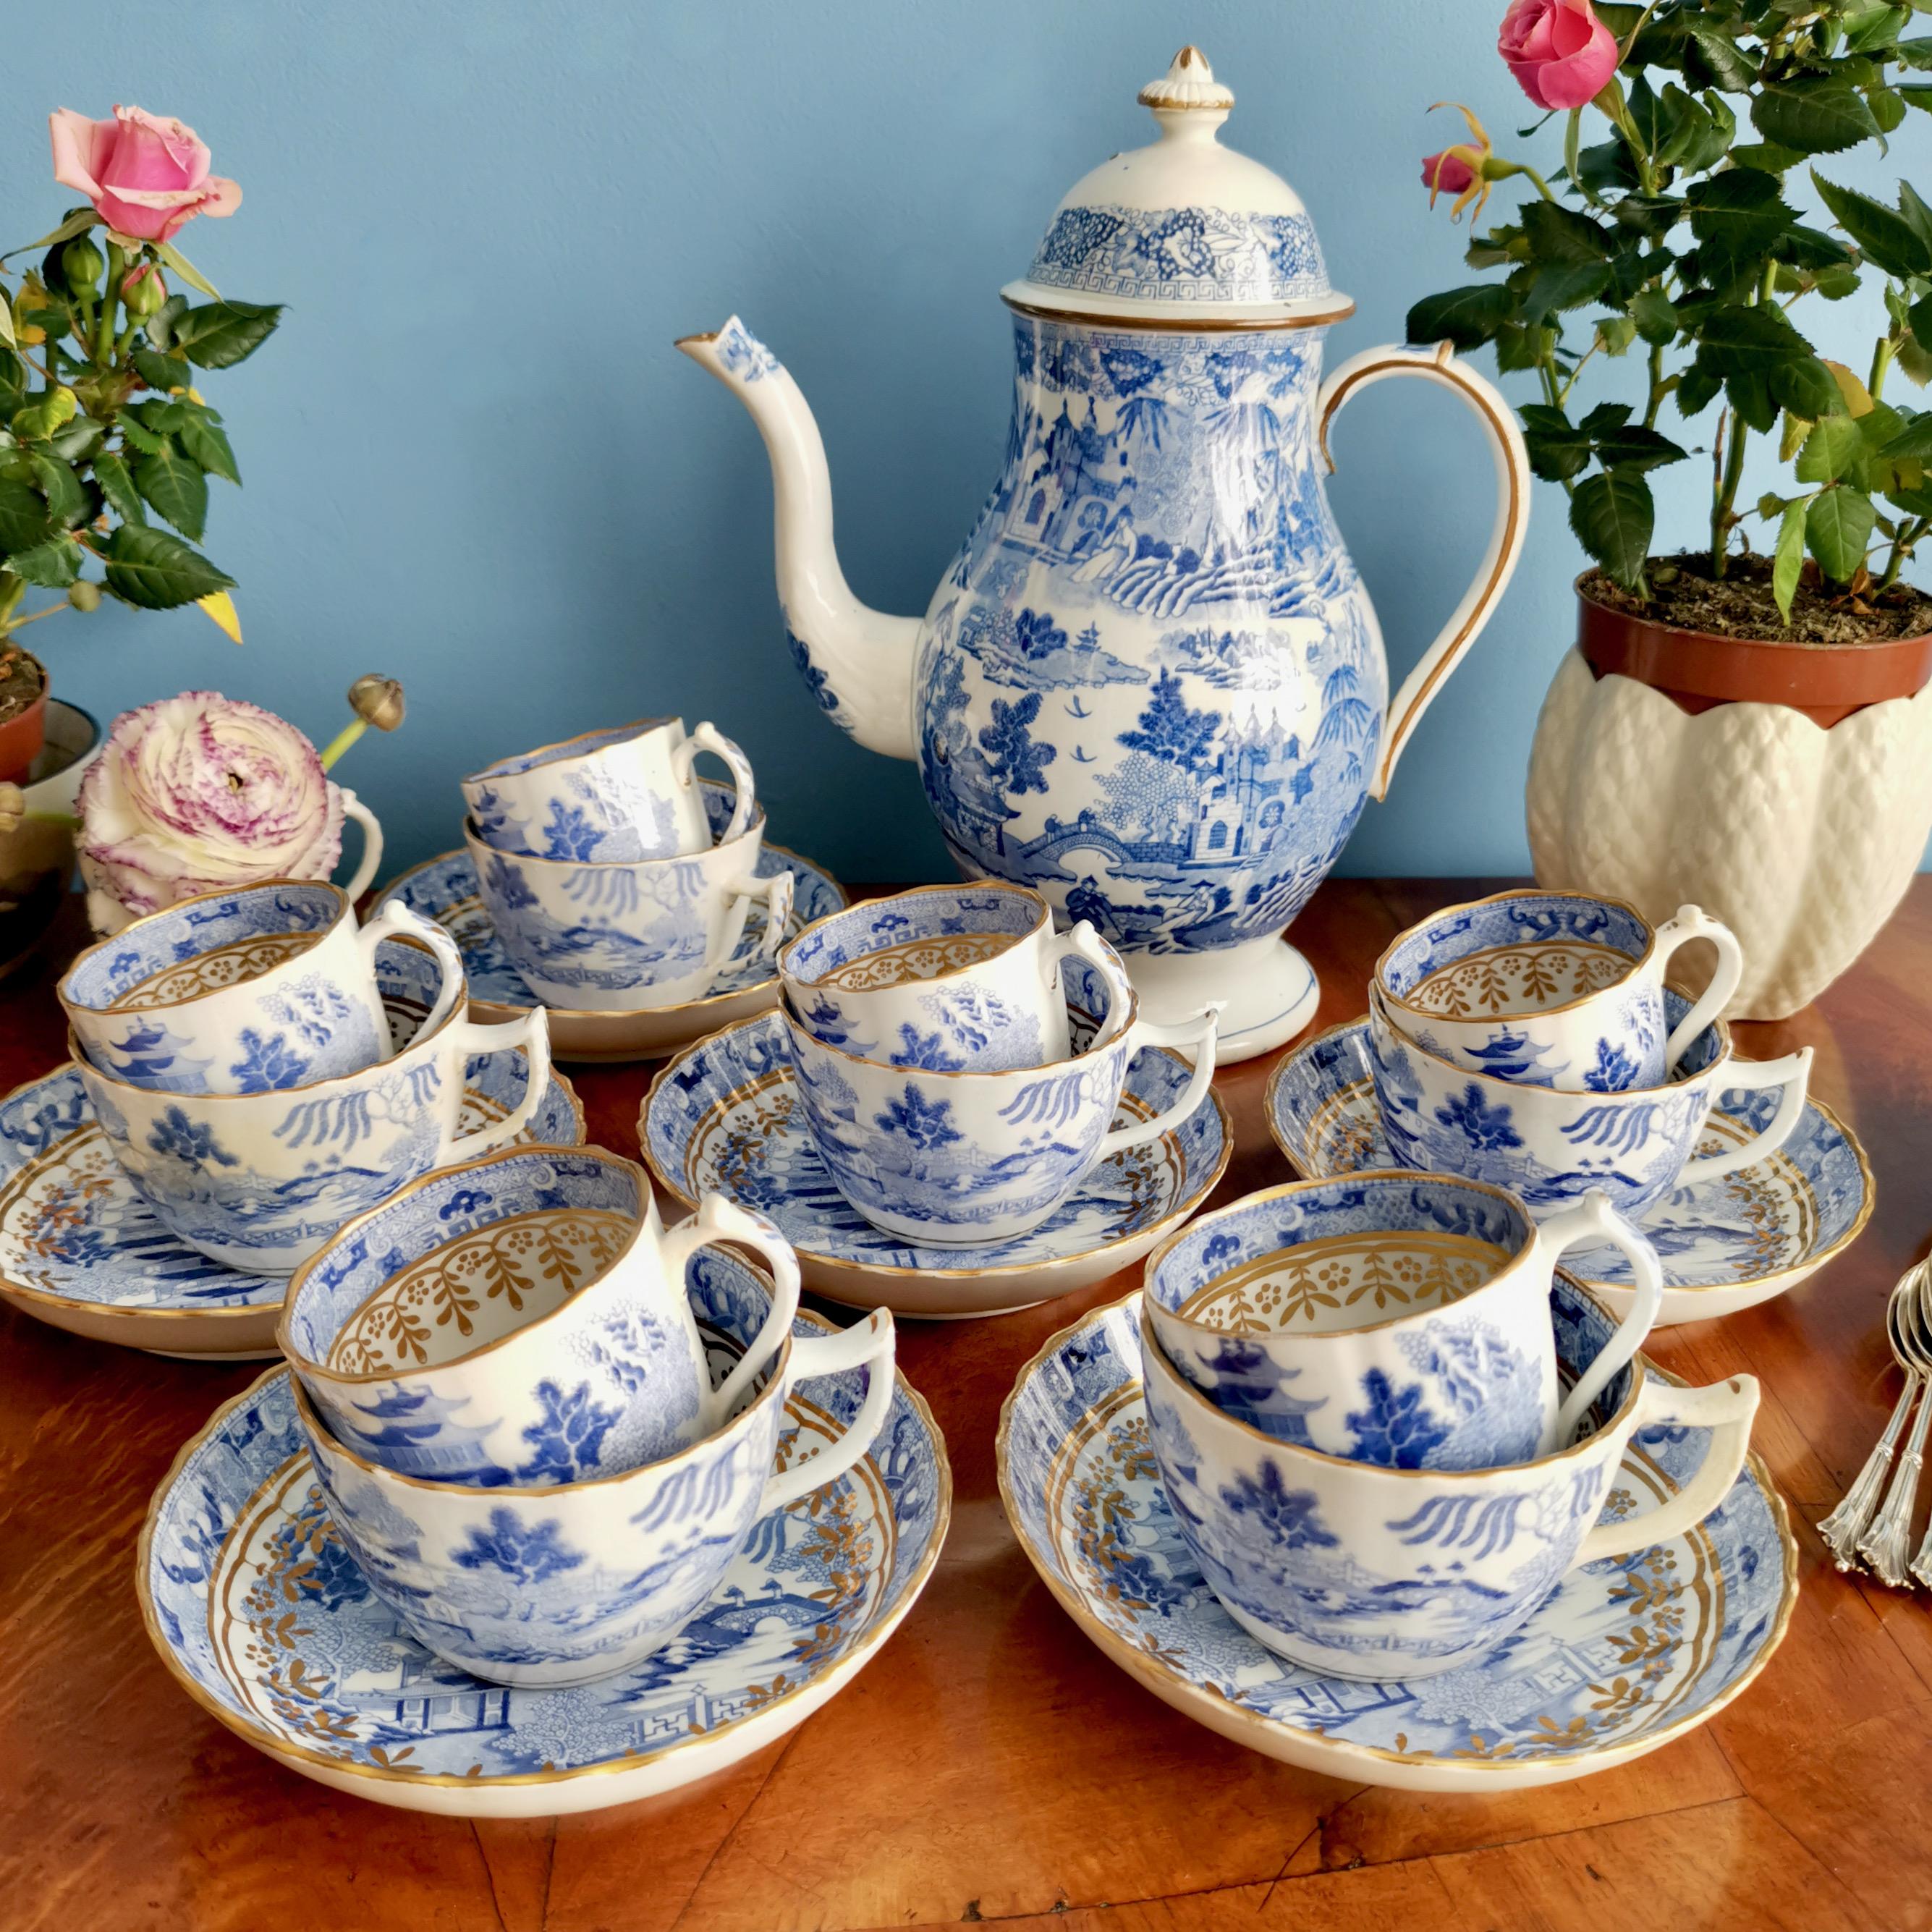 This is a wonderful tea and coffee service serving 6 with the beautiful Pagoda pattern in blue and white transfer. The coffee pot was made by Rathbone and the cups and saucers by Miles Mason.

I have also listed the set of teacup trios and the